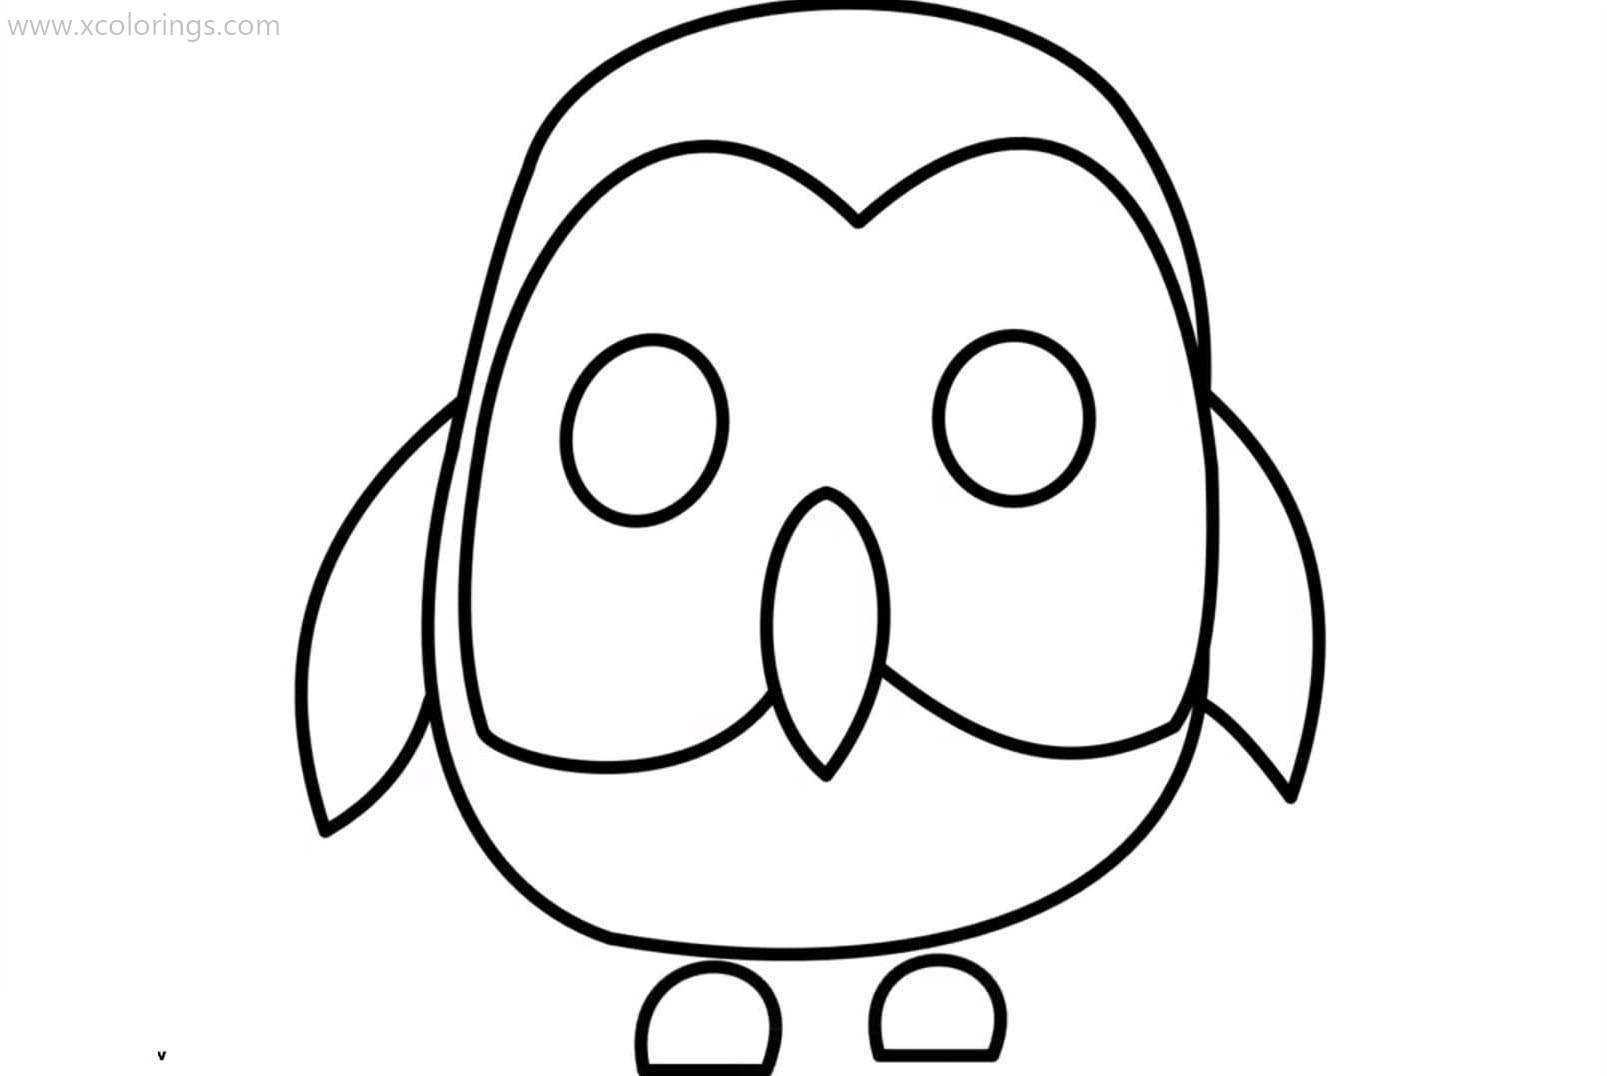 Roblox Adopt Me Coloring Pages Owl   XColorings.com